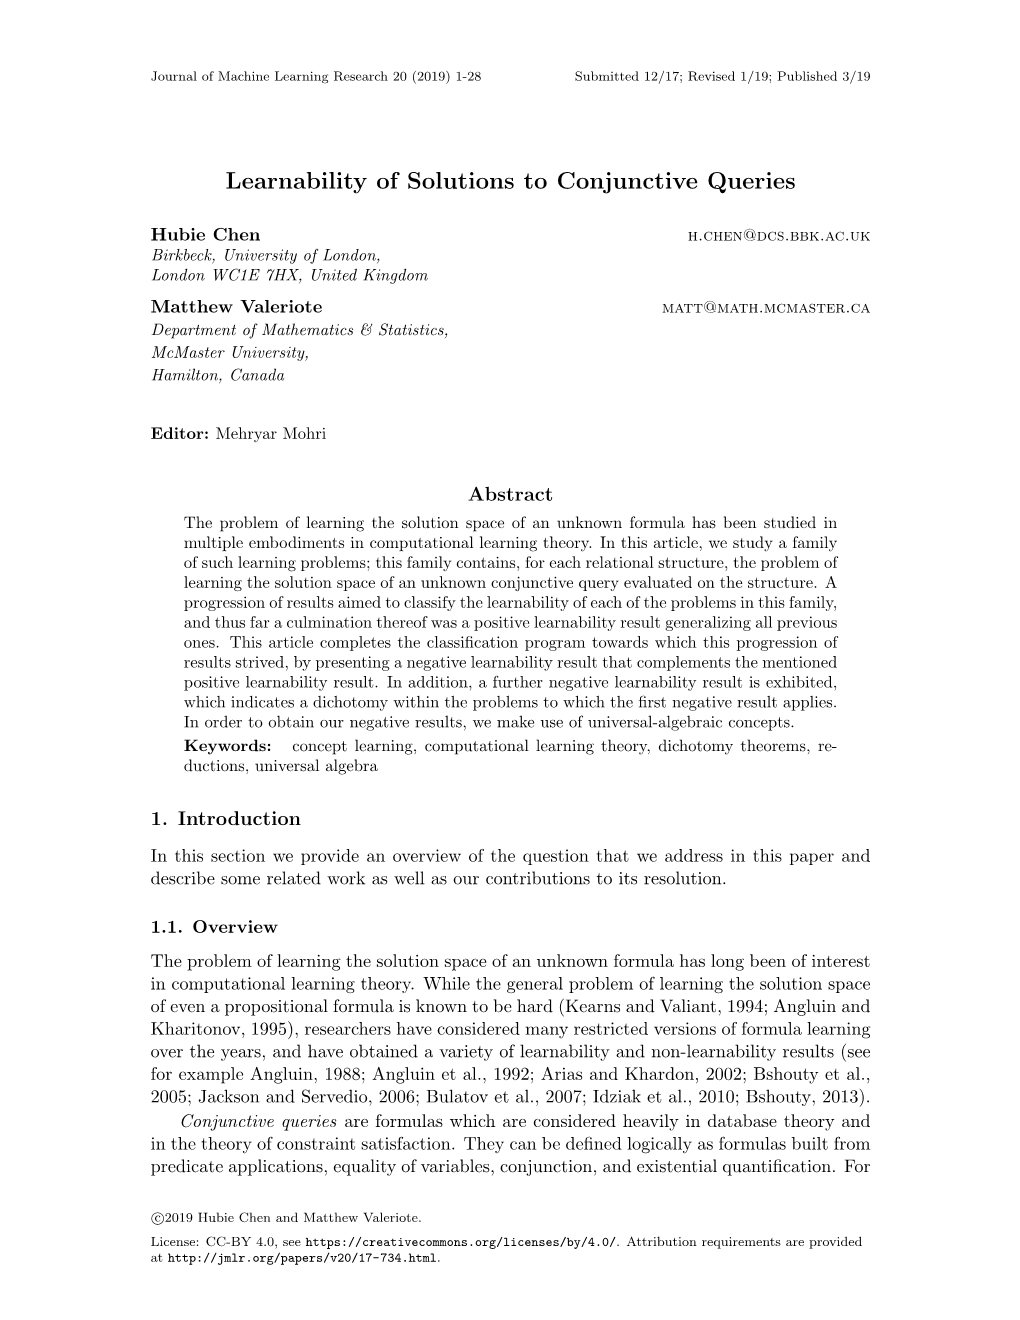 Learnability of Solutions to Conjunctive Queries